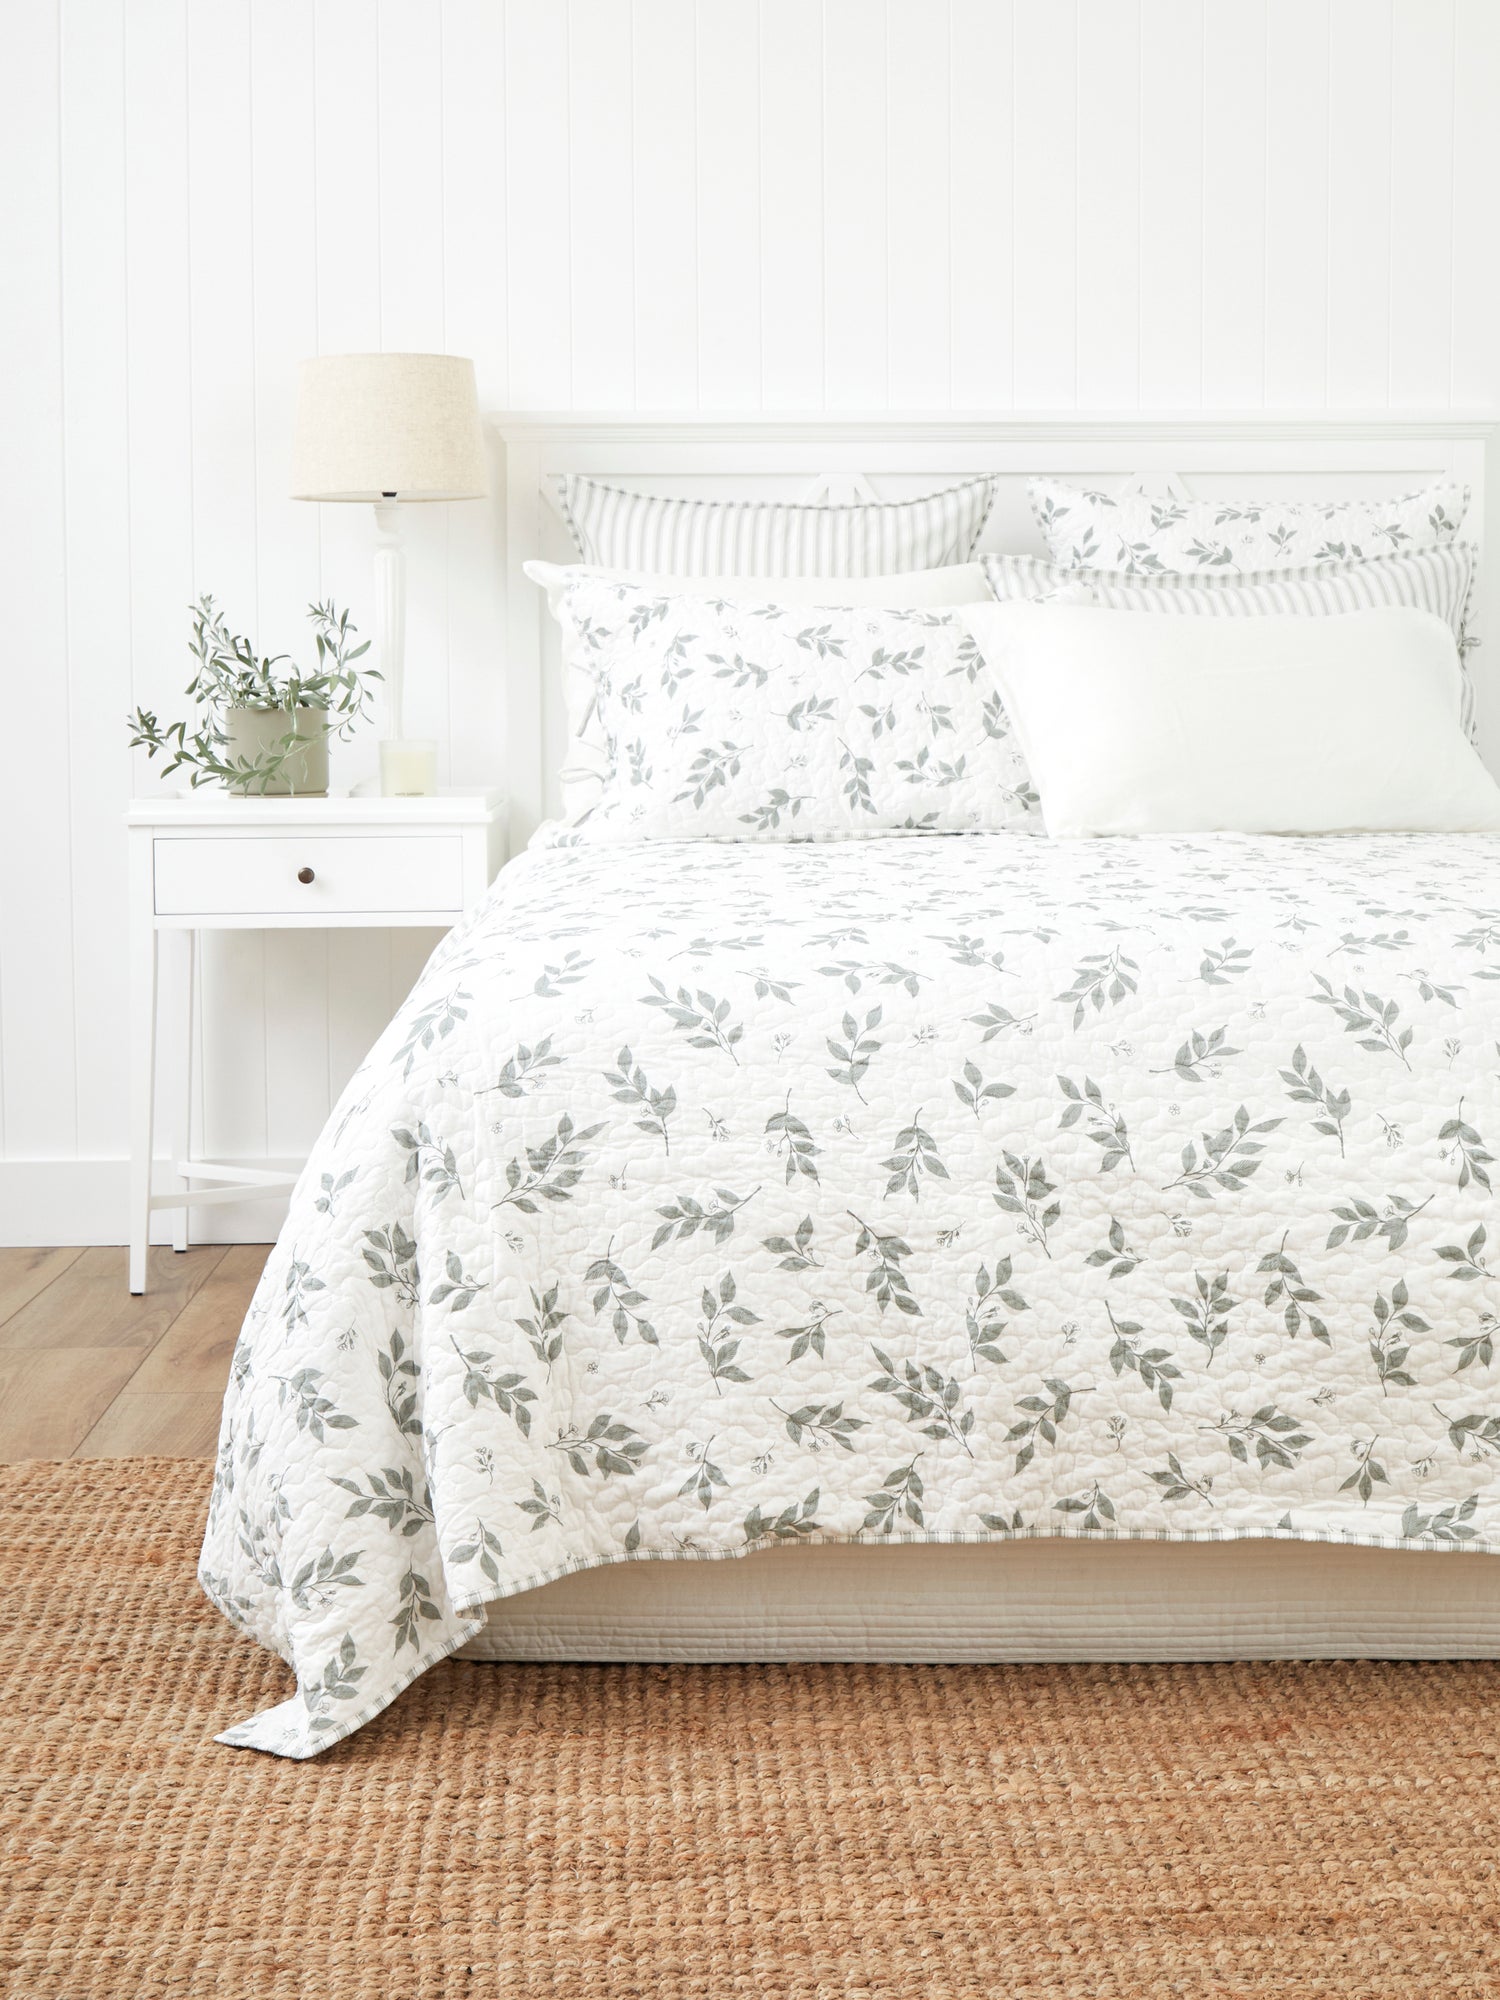 https://www.wallacecotton.com/content/products/arbor-quilt-sage-white-1-9482.jpg?width=1500